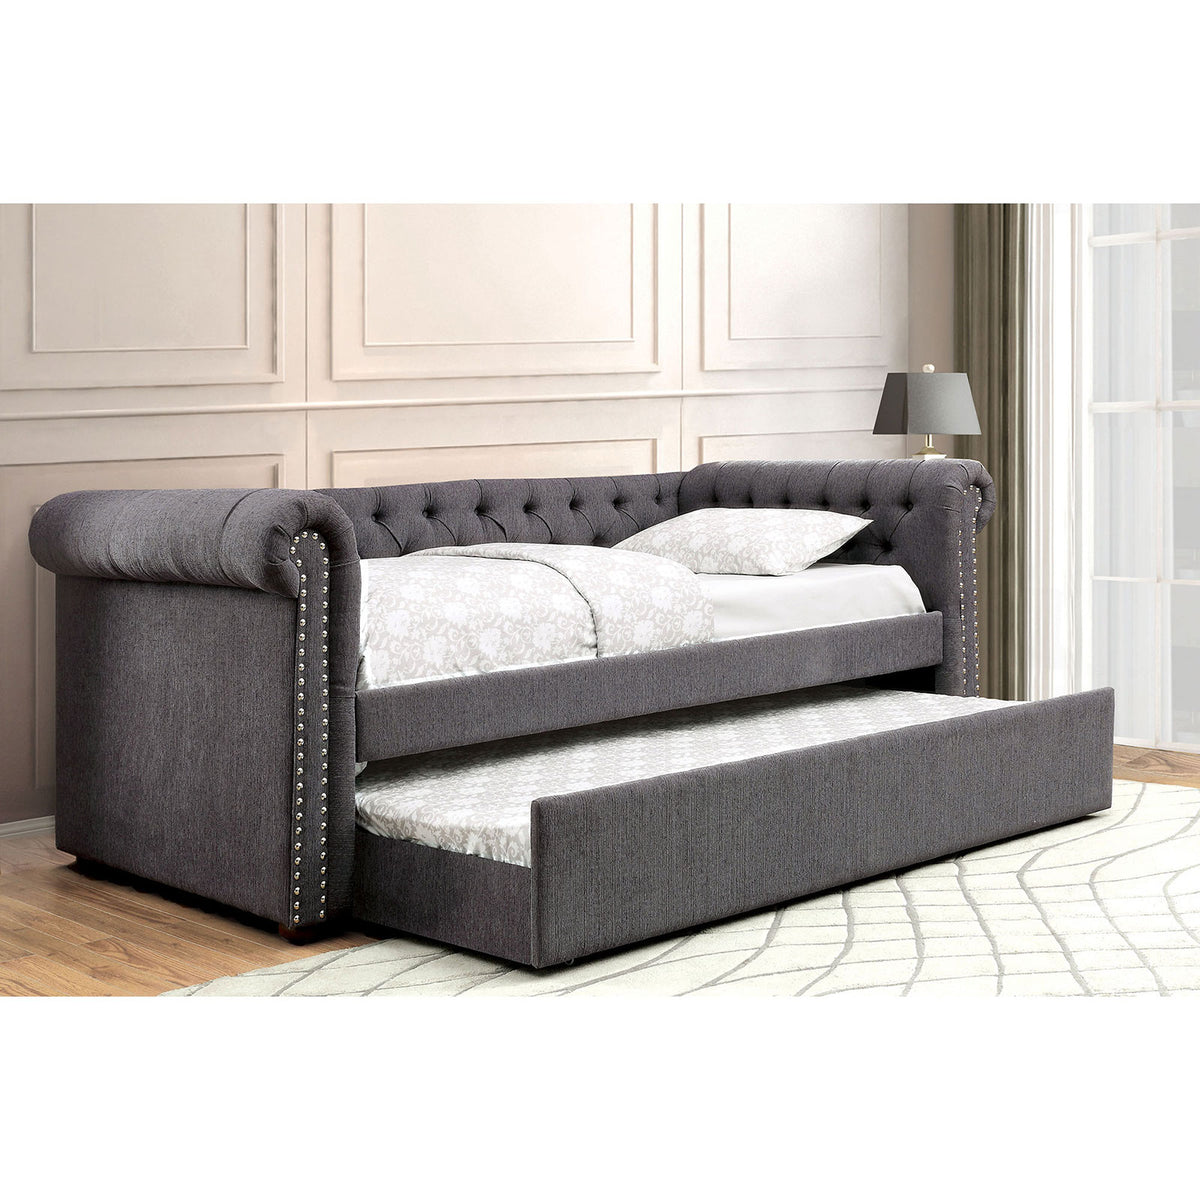 LEANNA Gray Daybed w/ Trundle, Gray LEANNA Gray Daybed w/ Trundle, Gray Half Price Furniture